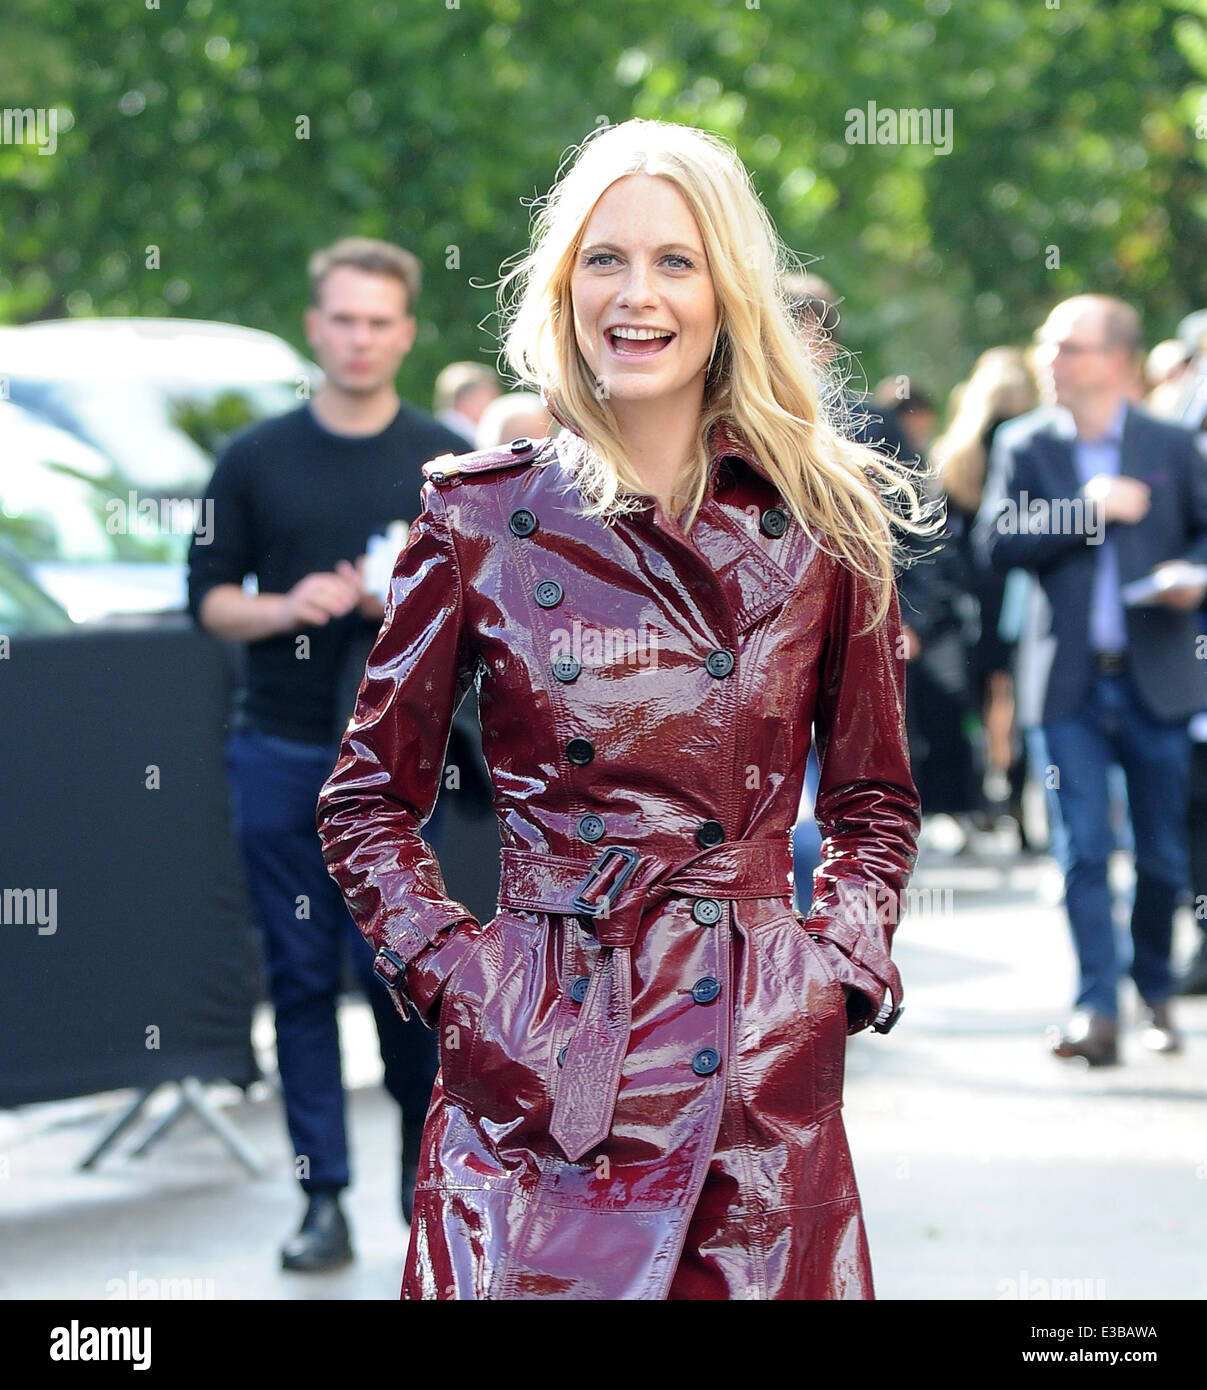 London Fashion Week SS14  - Burberry Prorsum - Arrivals  Featuring: Poppy Delevingne Where: London, United Kingdom When: 16 Sep Stock Photo